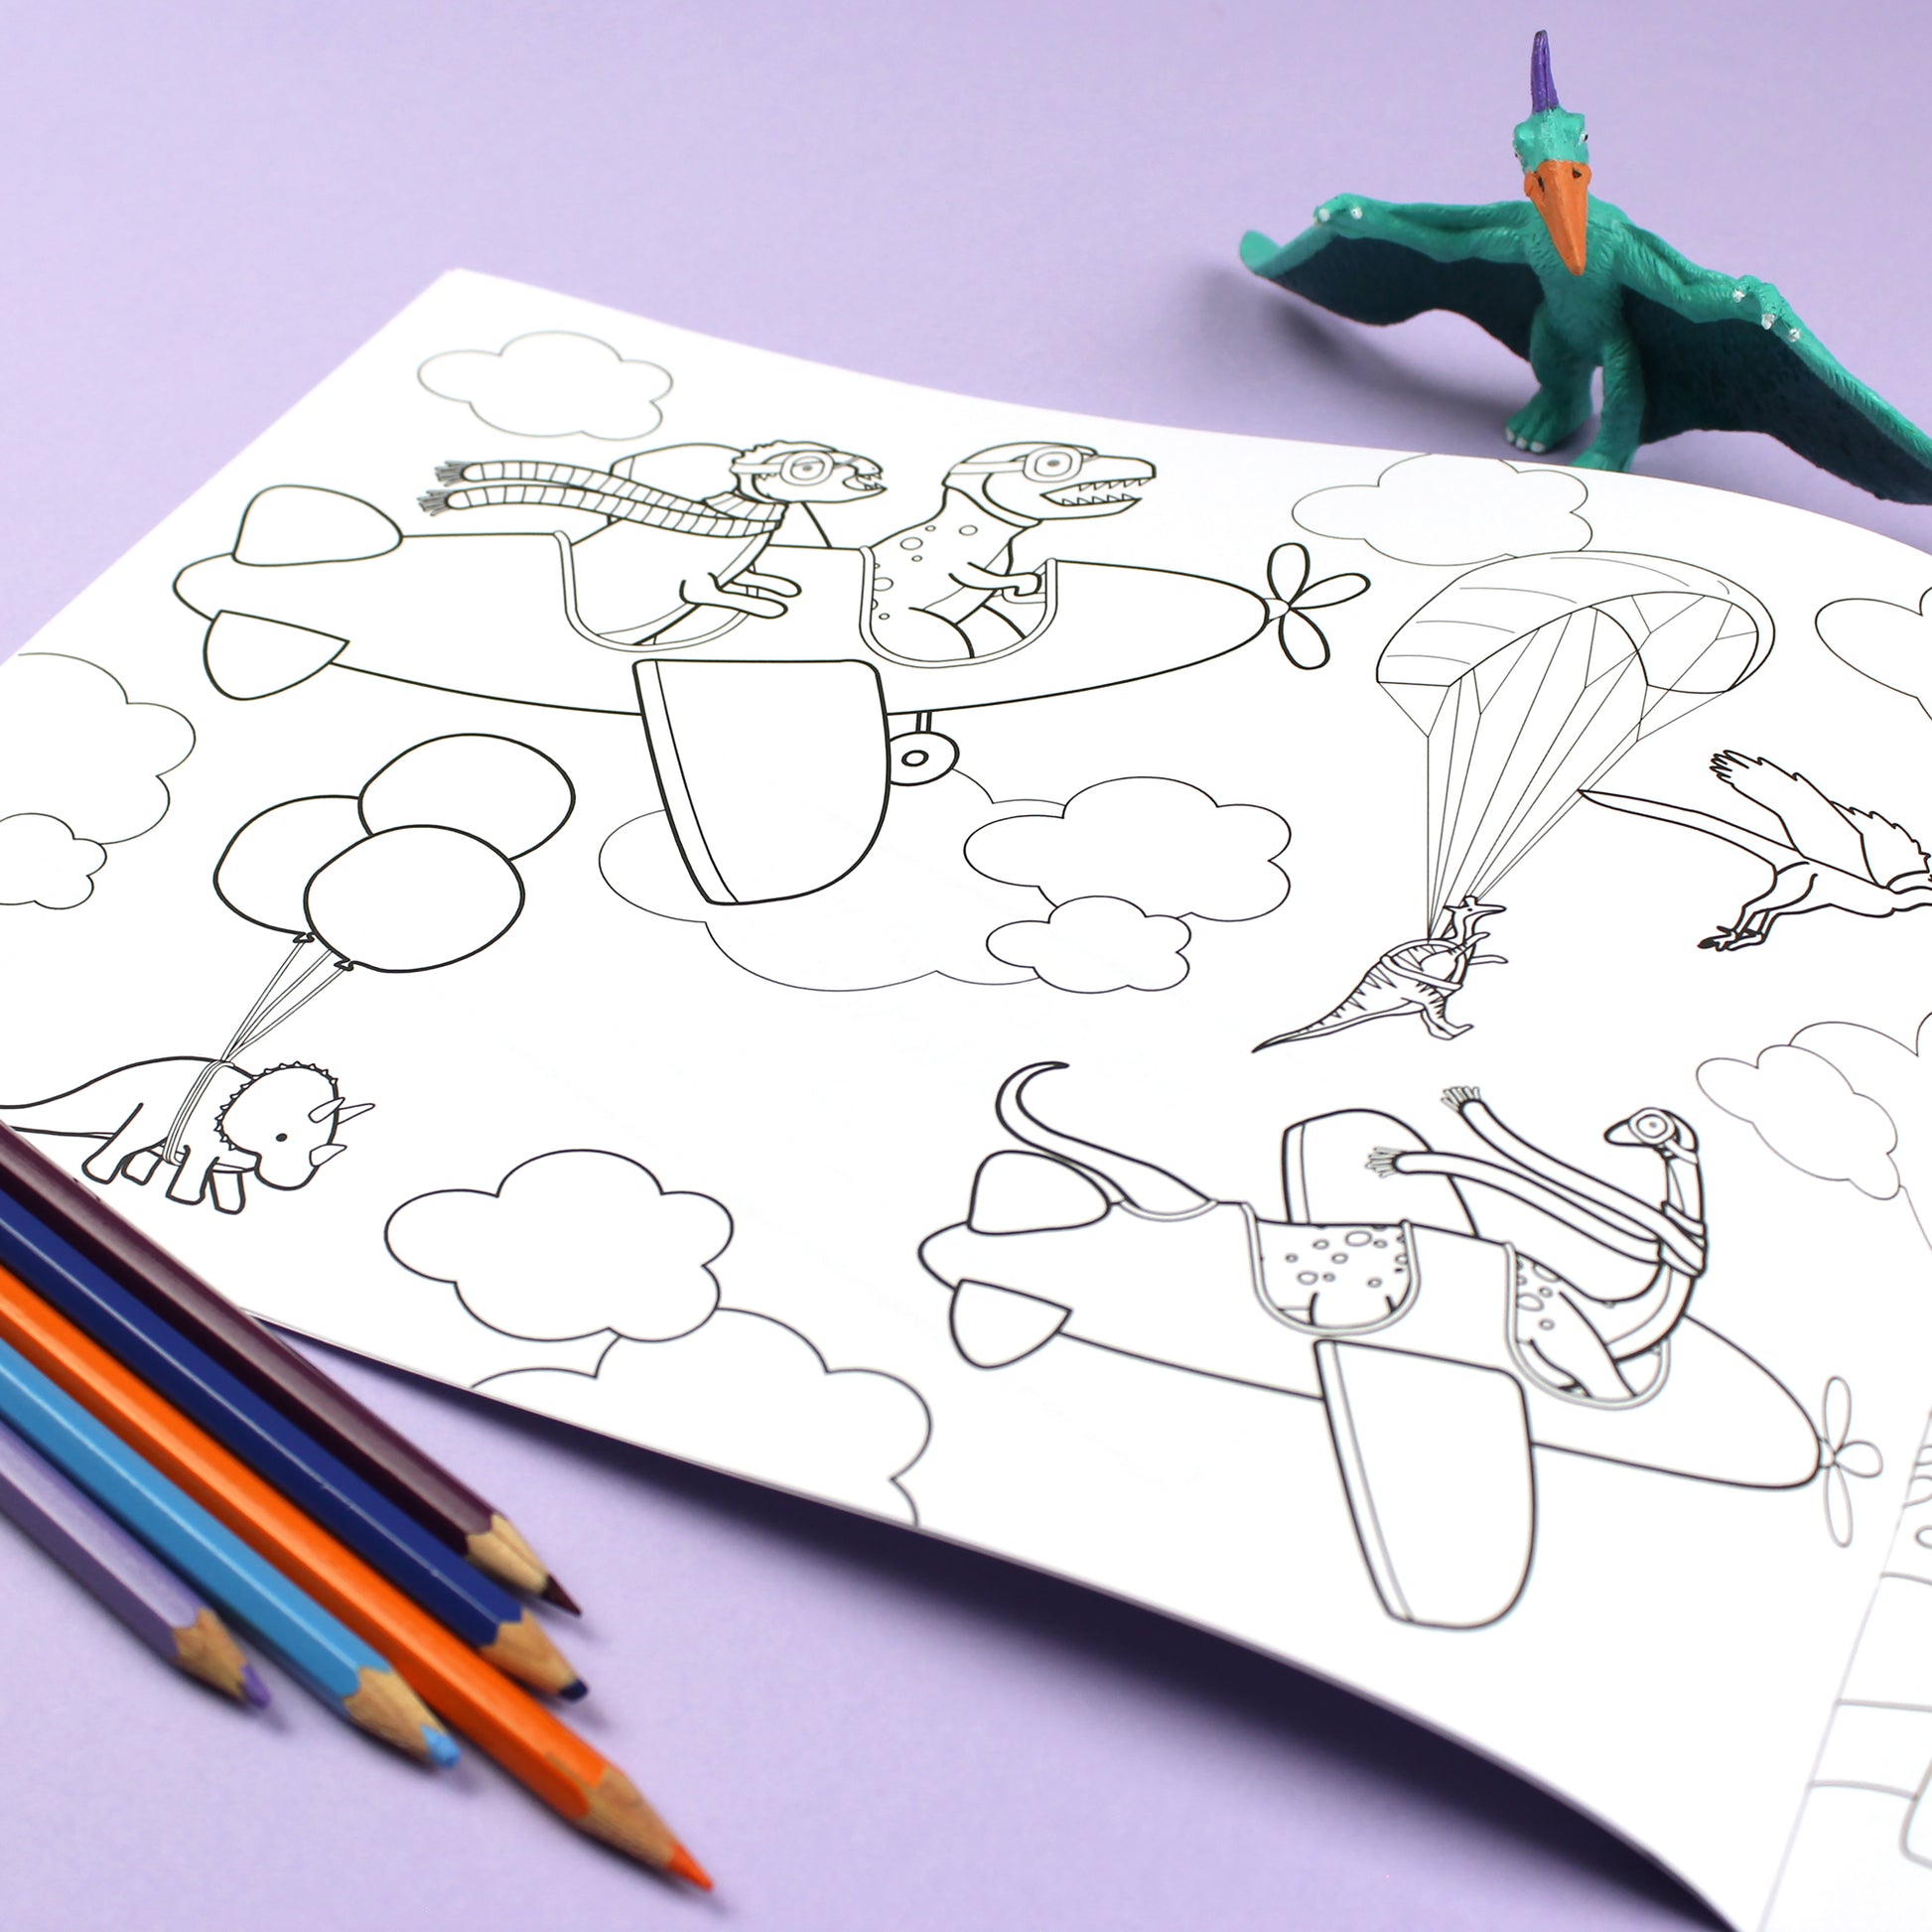 Inside page of Dinosaurs Doing Stuff colouring book. The page features black line illustrations of dinosaurs flying planes, hanging from balloons and parasailing among clouds